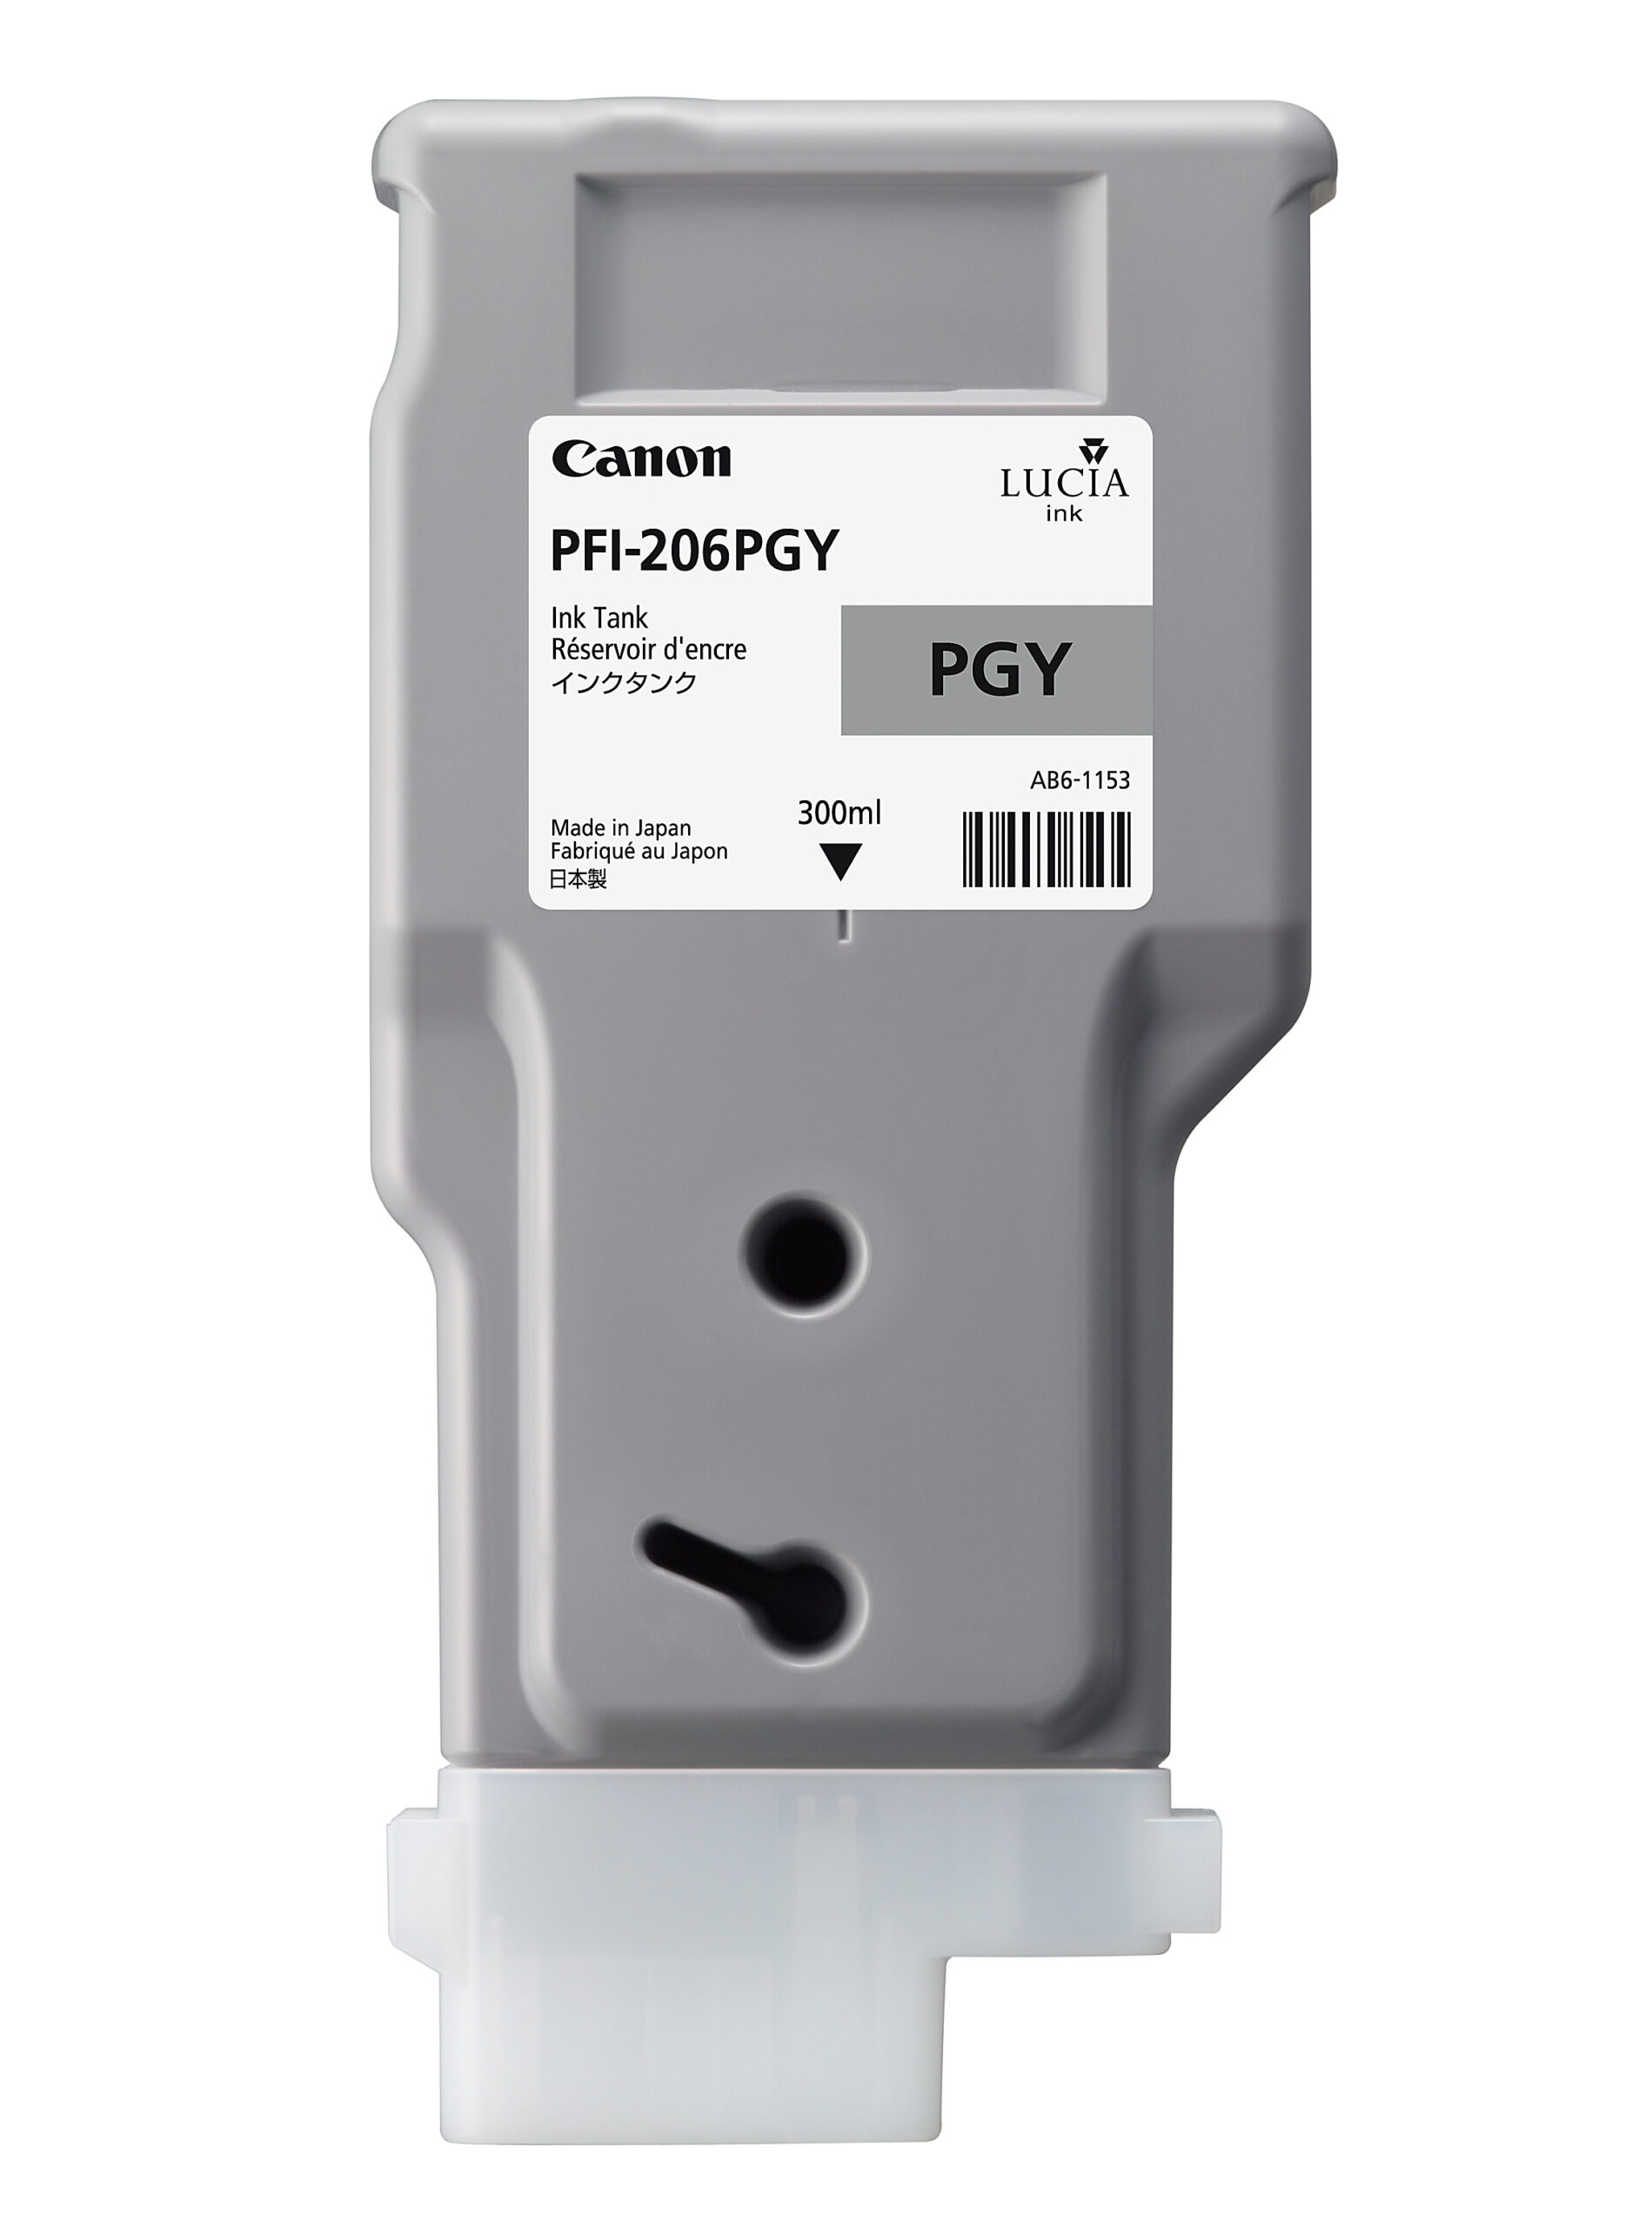 Canon PFI-206PGY Printer Ink Cartridge - Photo Grey Ink Tank - 300ml - 5313B001AA - for Canon iPF6400 & iPF6450 Printers - express delivery from GDS - Graphic Design Supplies Ltd